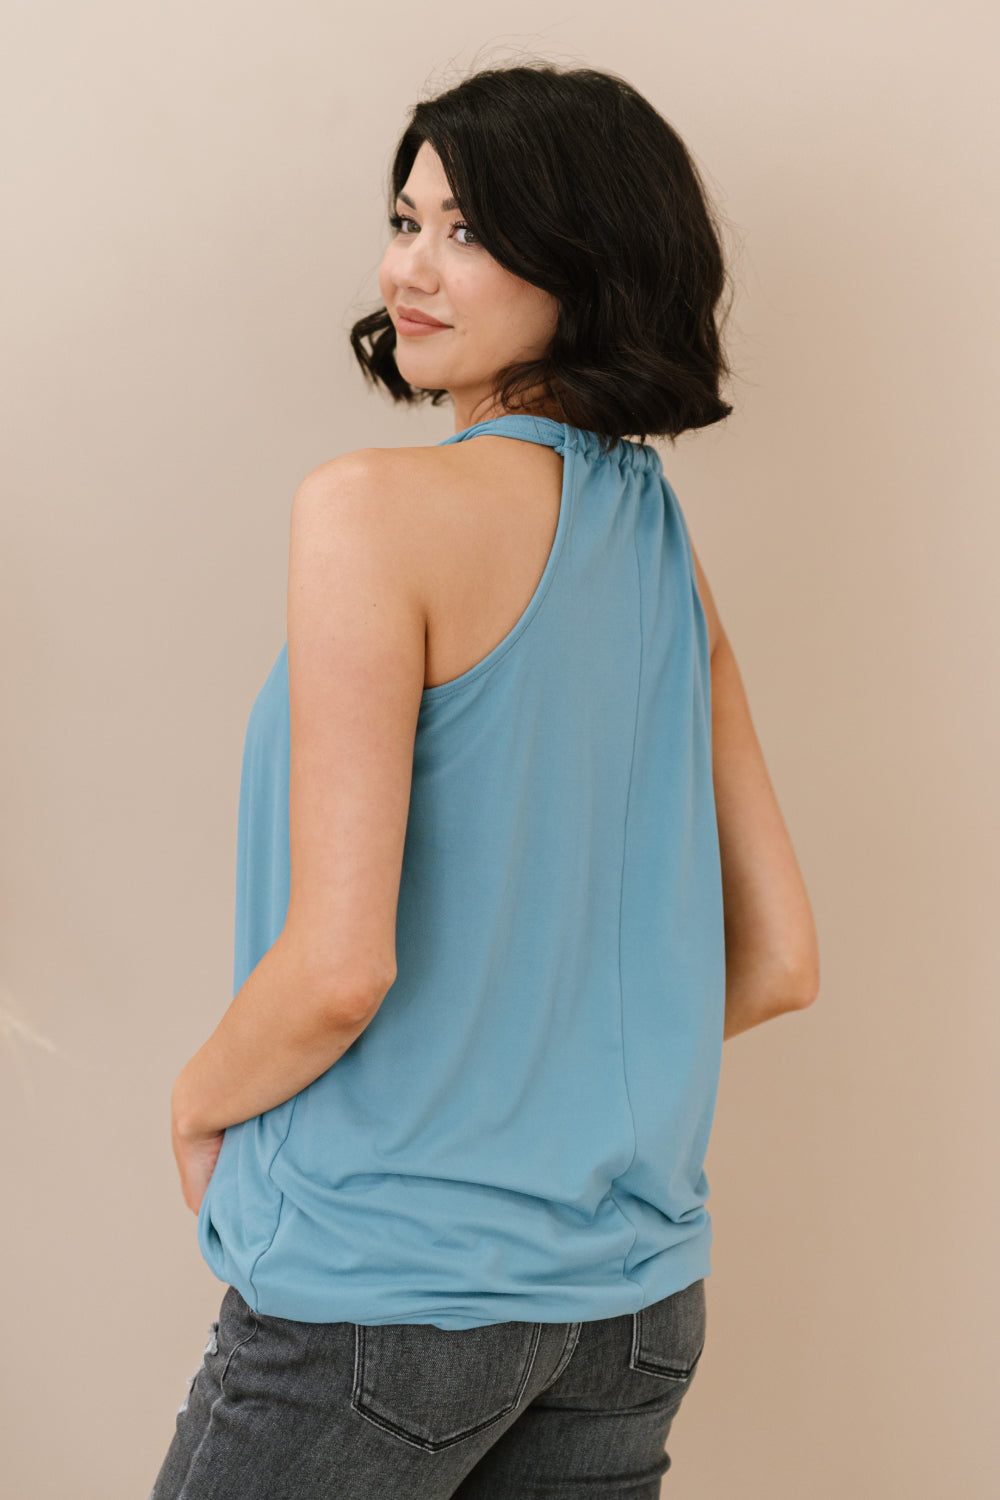 Cherished Time Surplice Top in Blue Grey   